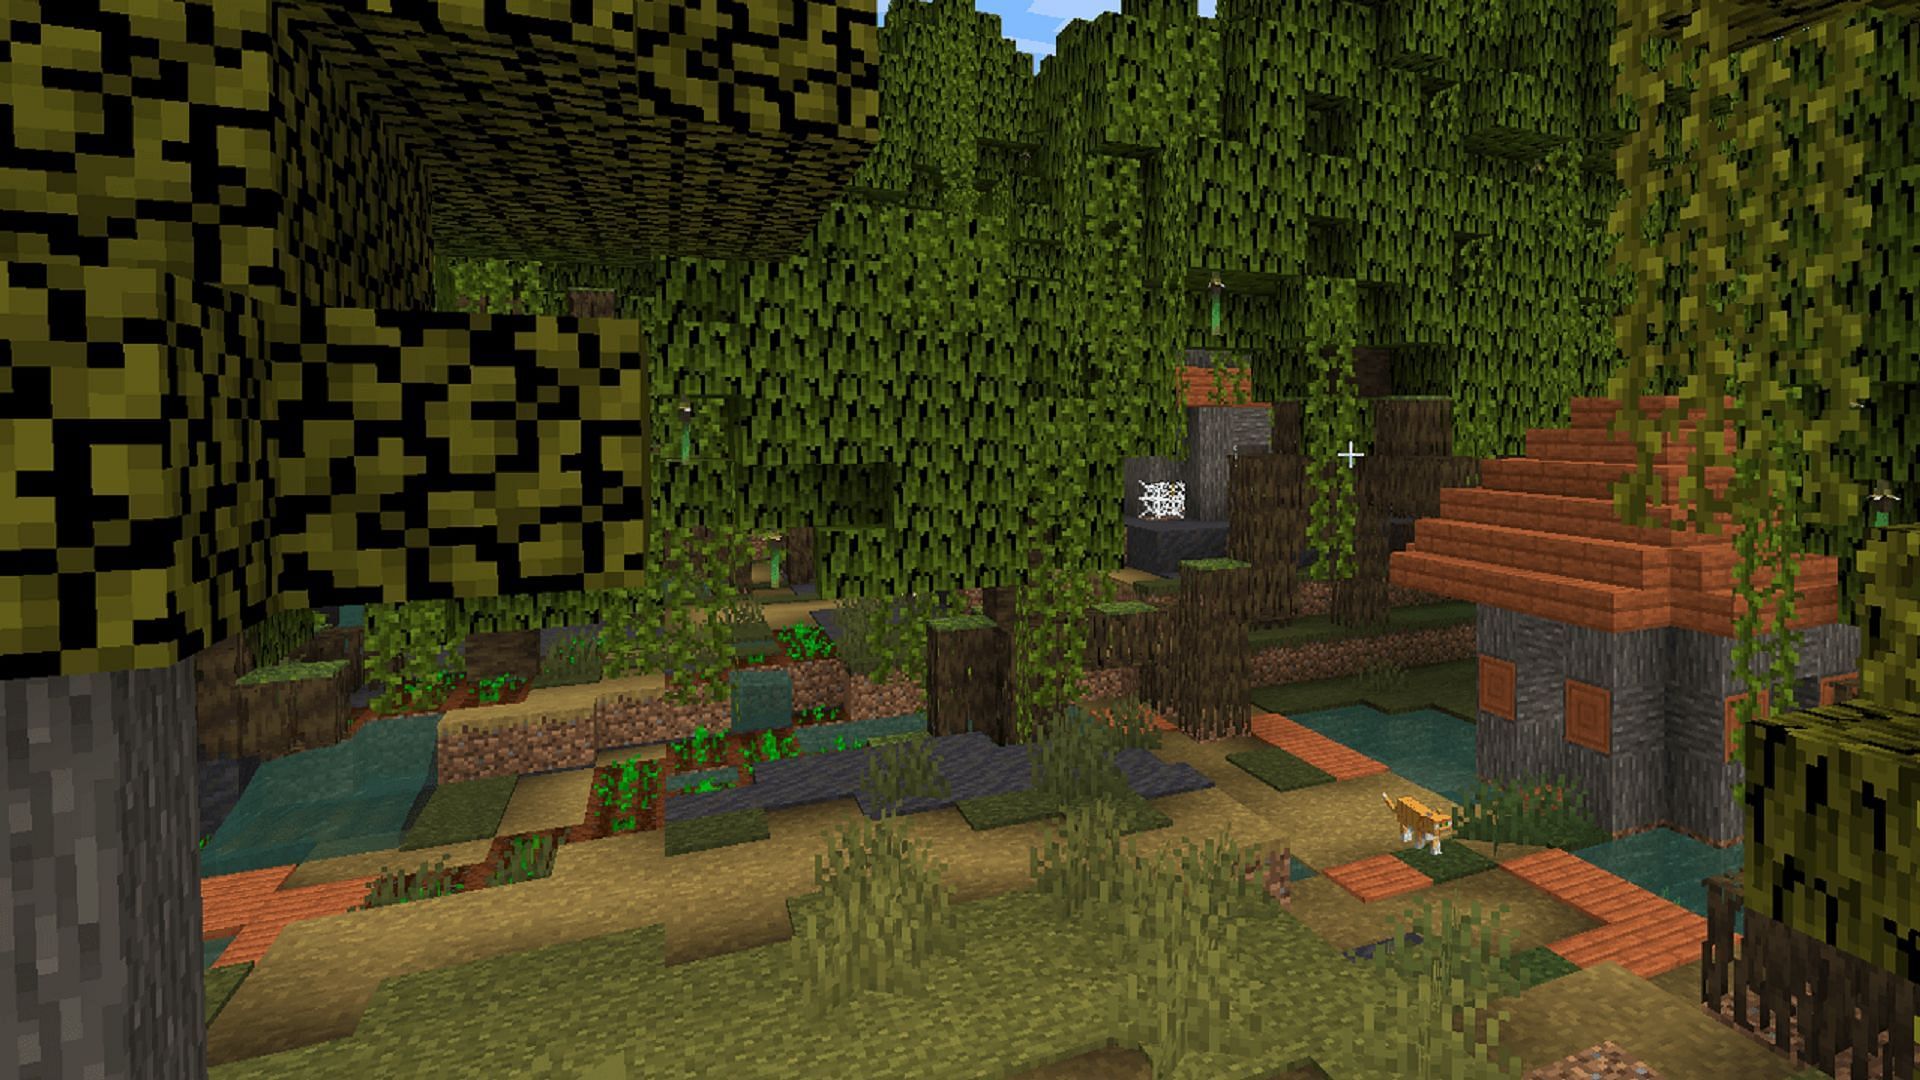 This Minecraft village is out of place and abandoned in this seed (Image via Mojang)